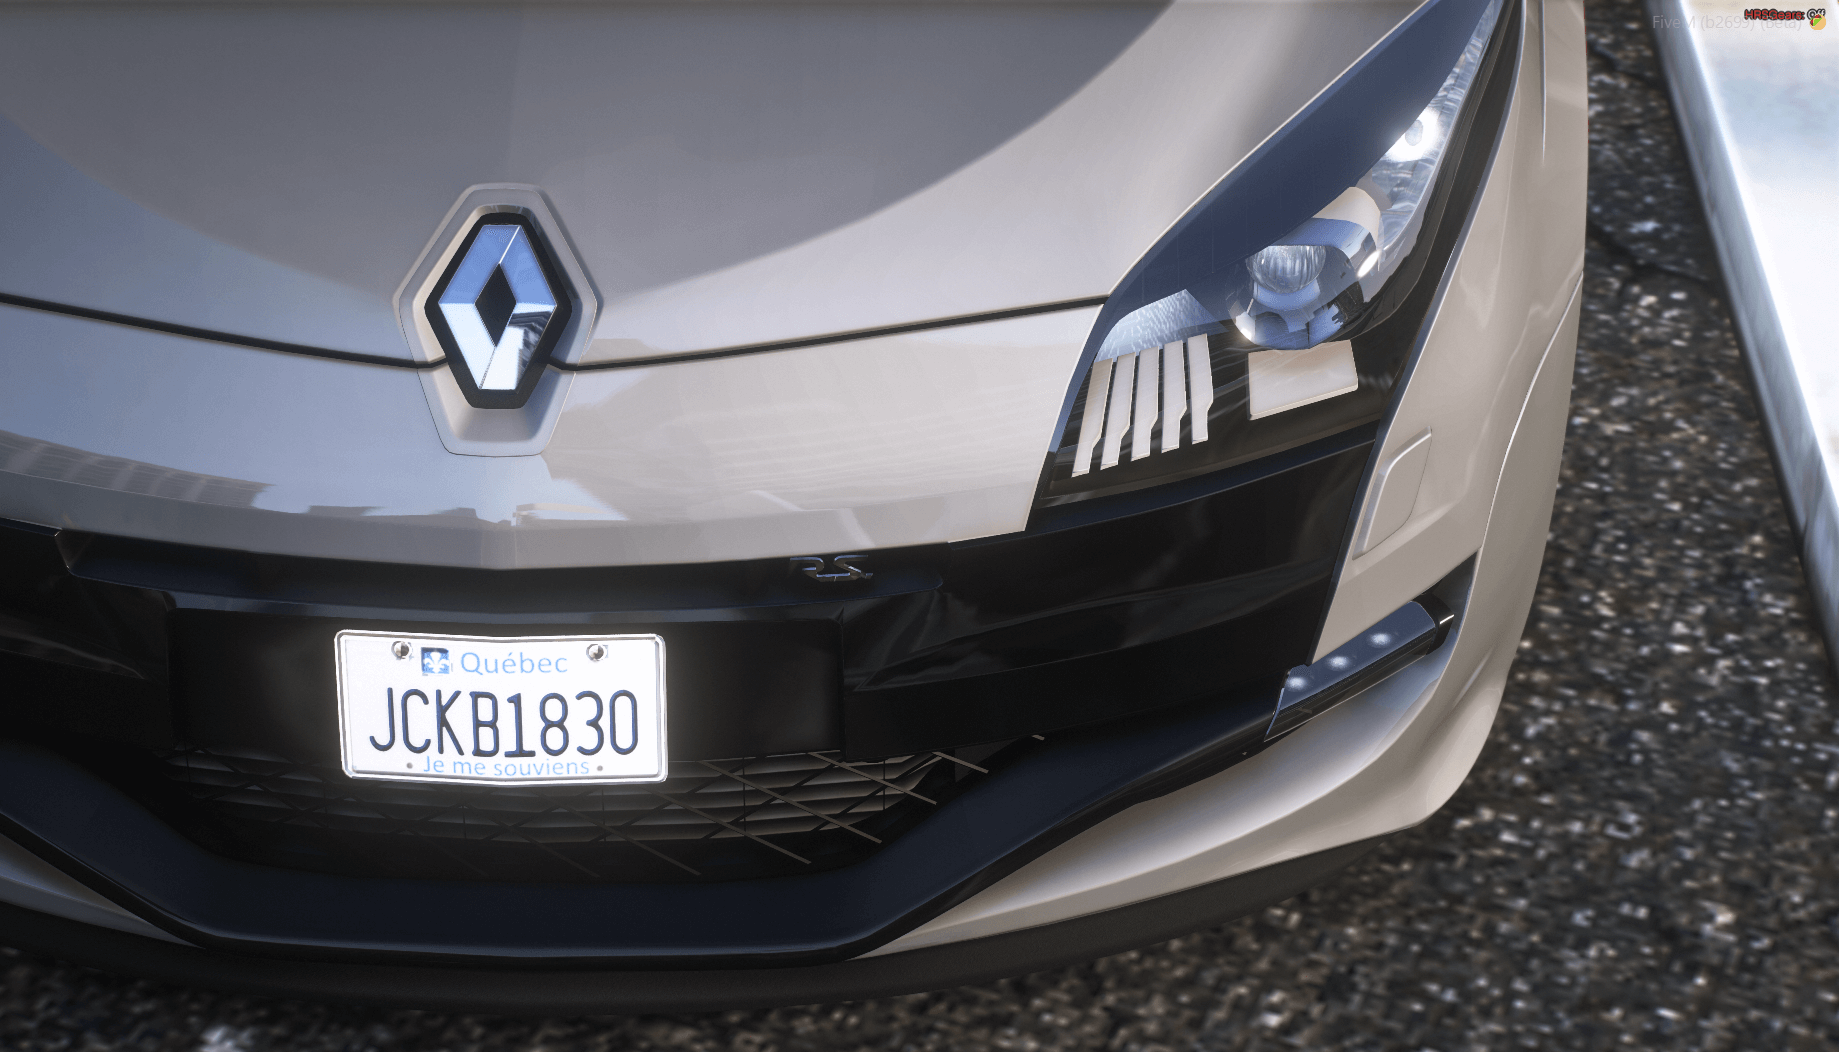 Renault Megane III RS 2009 [Add-On / Tuning / FiveM / Replace] 